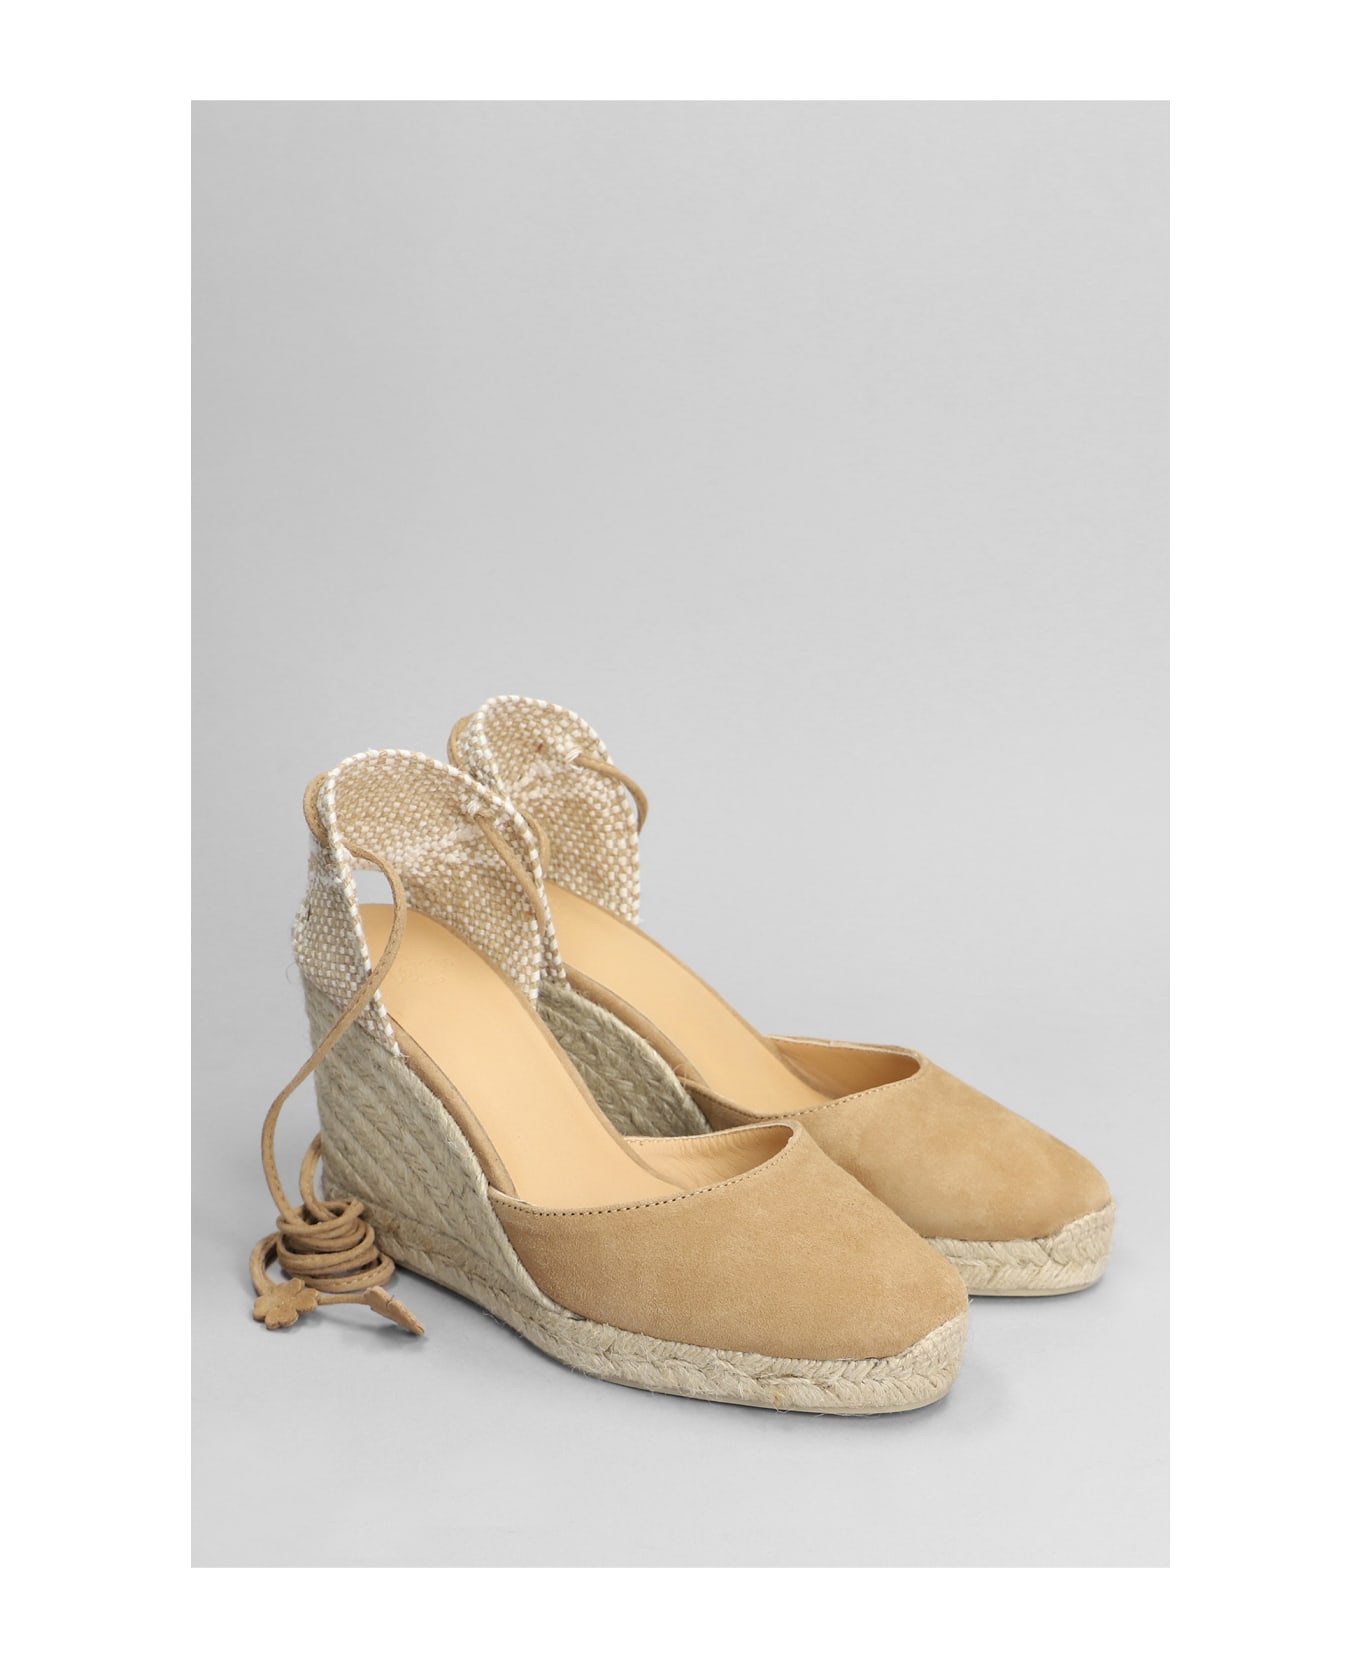 Castañer Carina-8-007 Wedges In Leather Color Suede - leather color ウェッジシューズ